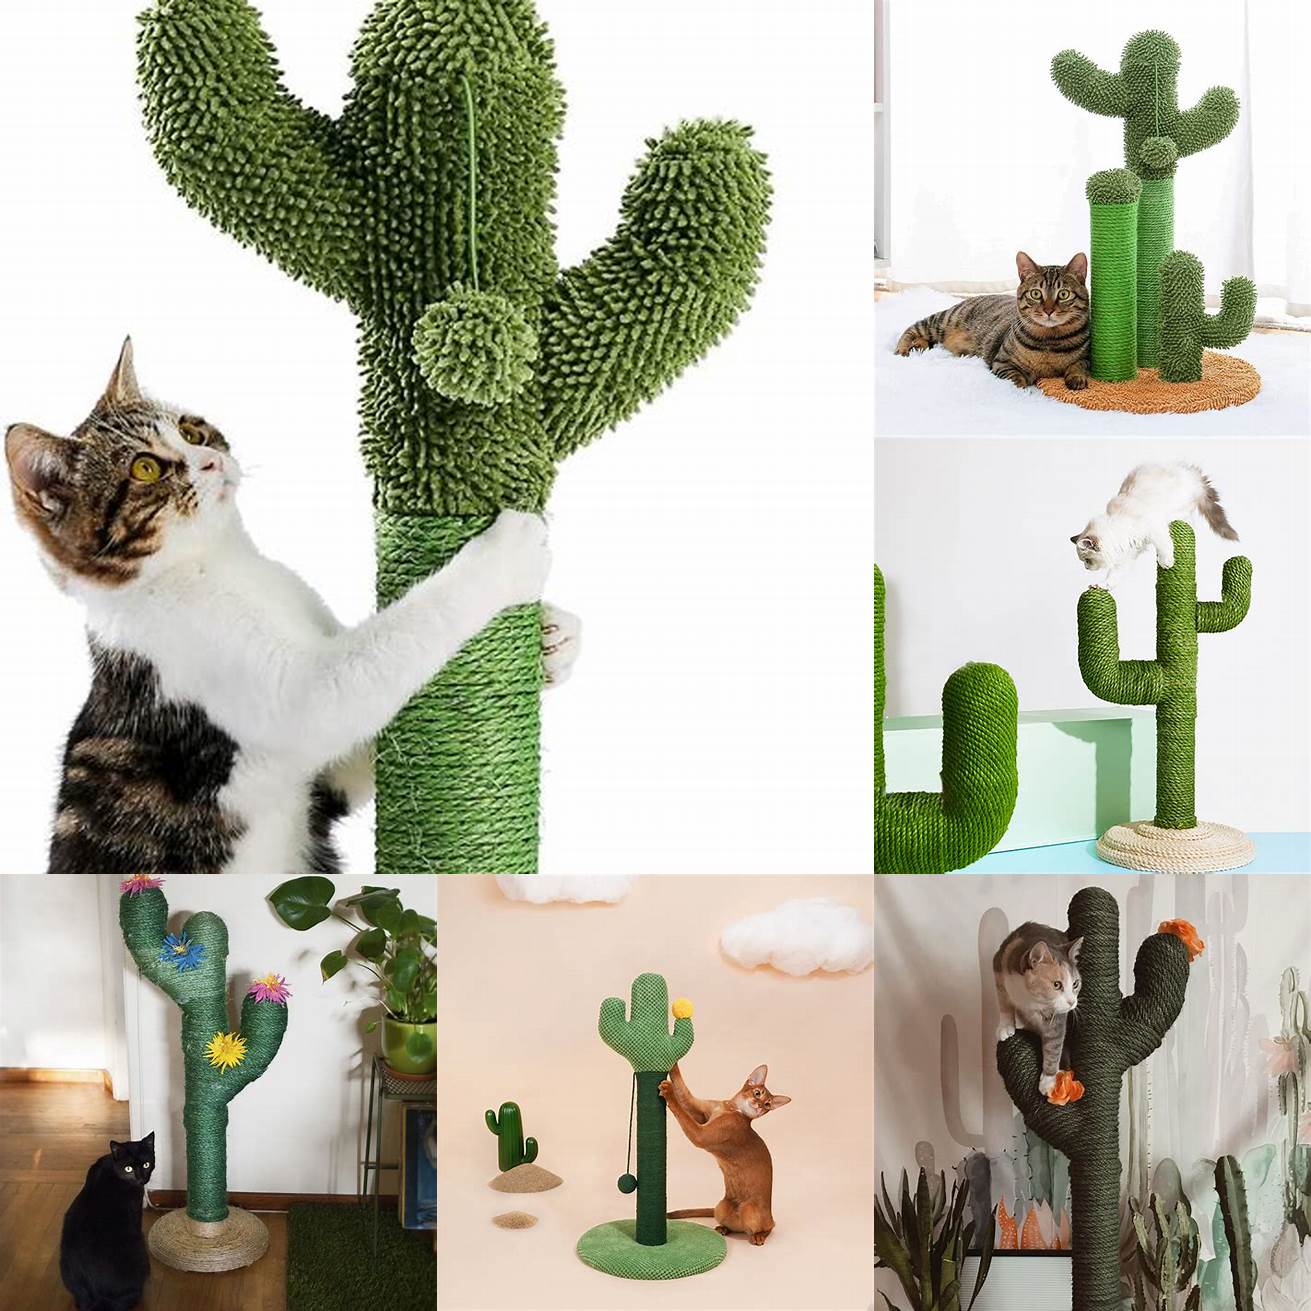 Pair the Cactus Cat Scratching Post with other cactus-themed decor to create a cohesive look